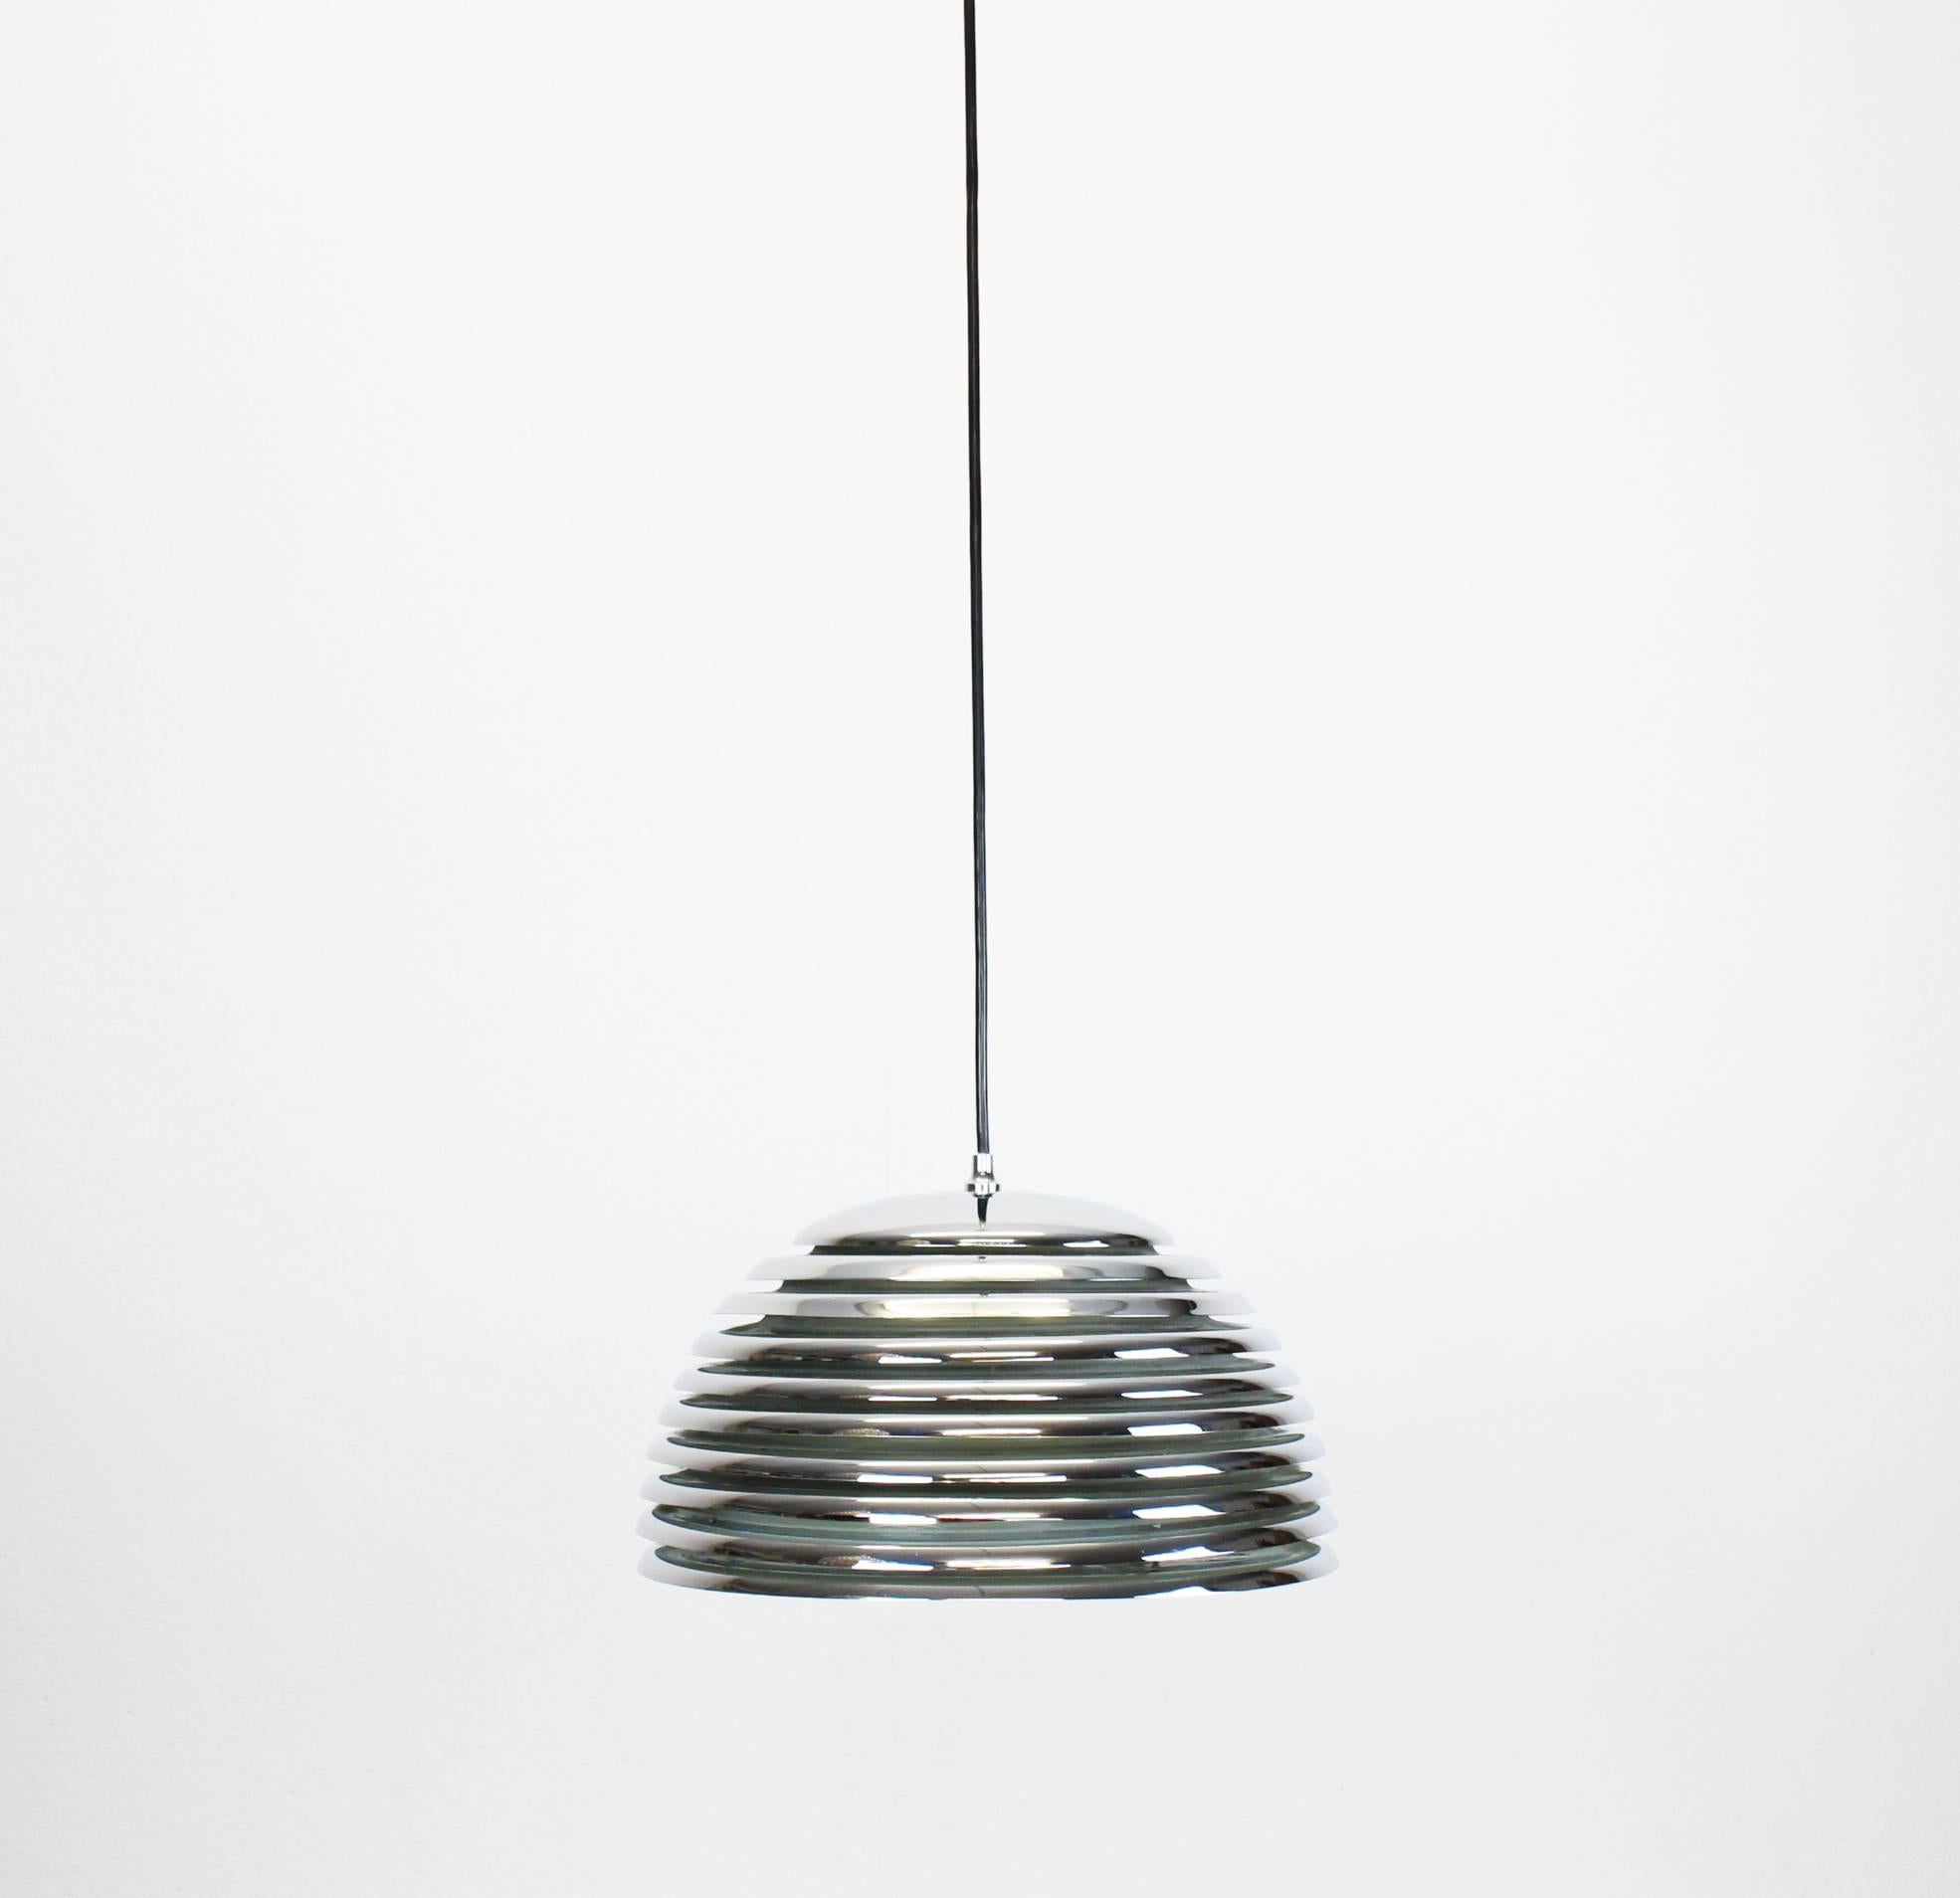 Very nice pendant light with chrome rings, designed by Kazuo Motozawa for Staff Leuchten manufactured in Germany, circa the 1970s.

High quality and in very good condition. Cleaned, well-wired and ready to use. 

The fixture requires 1 x E27